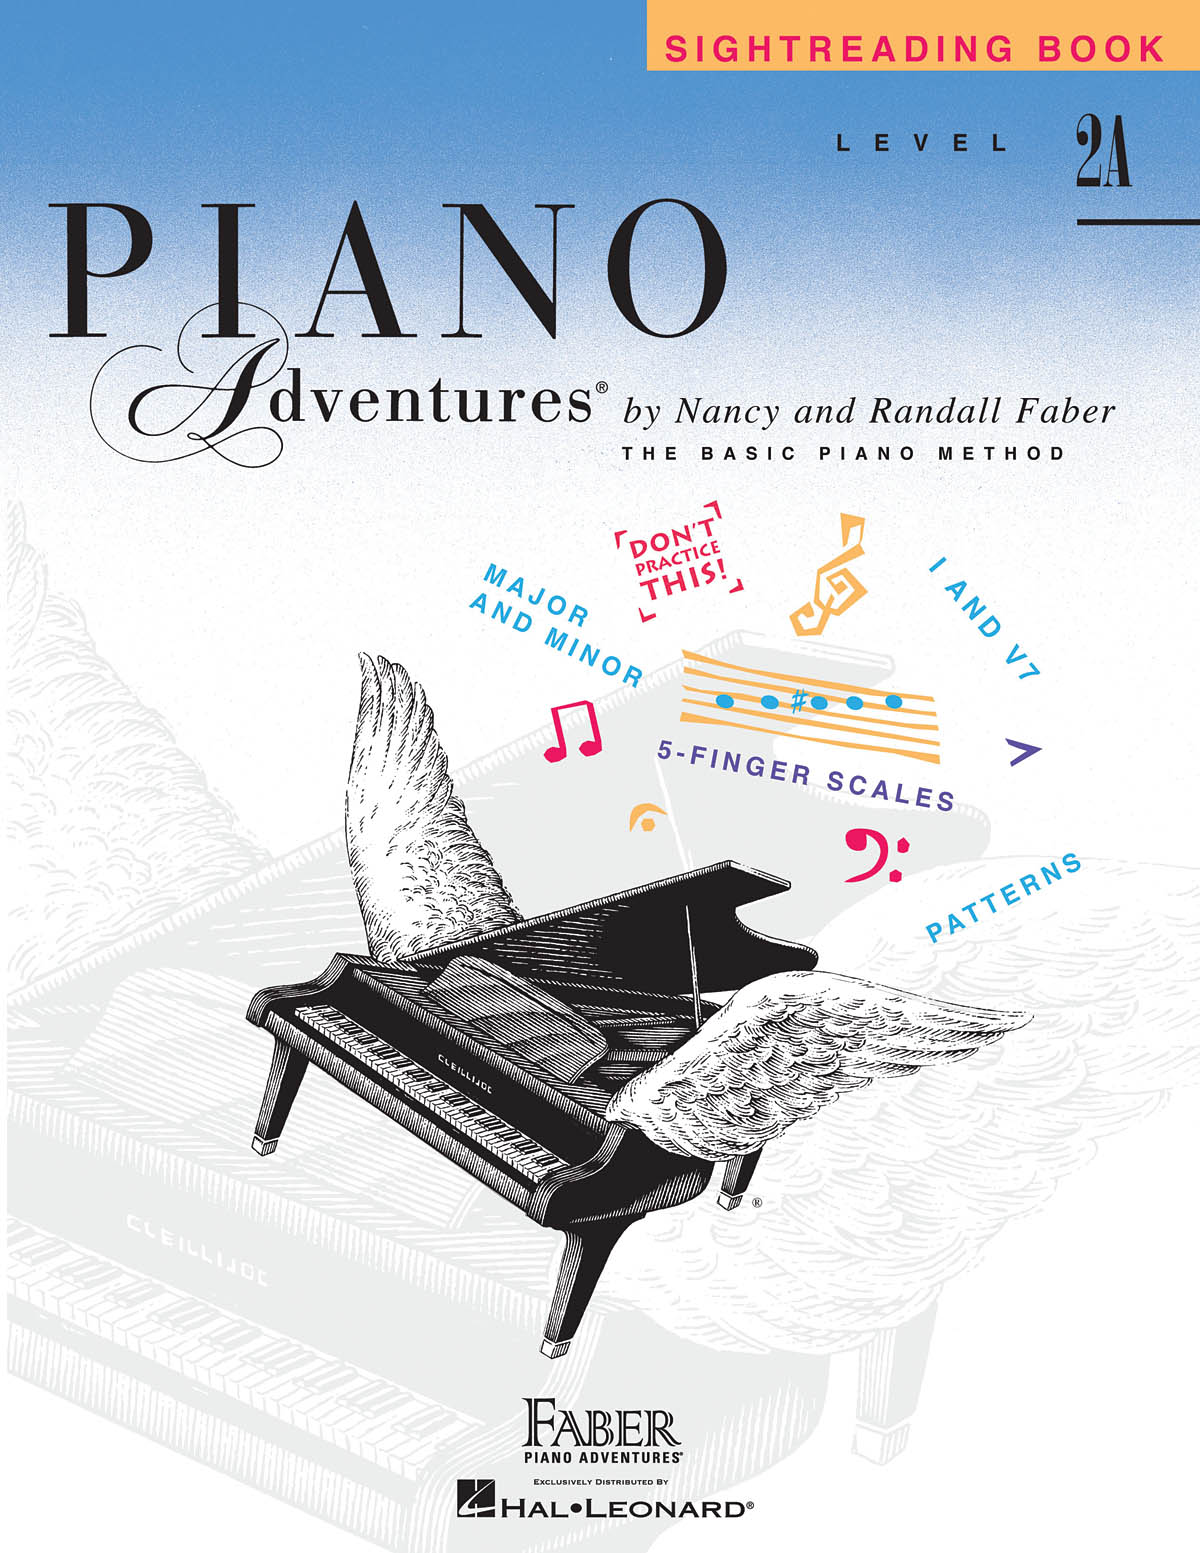 Faber Piano Adventures: Sightreading Book Level 2a